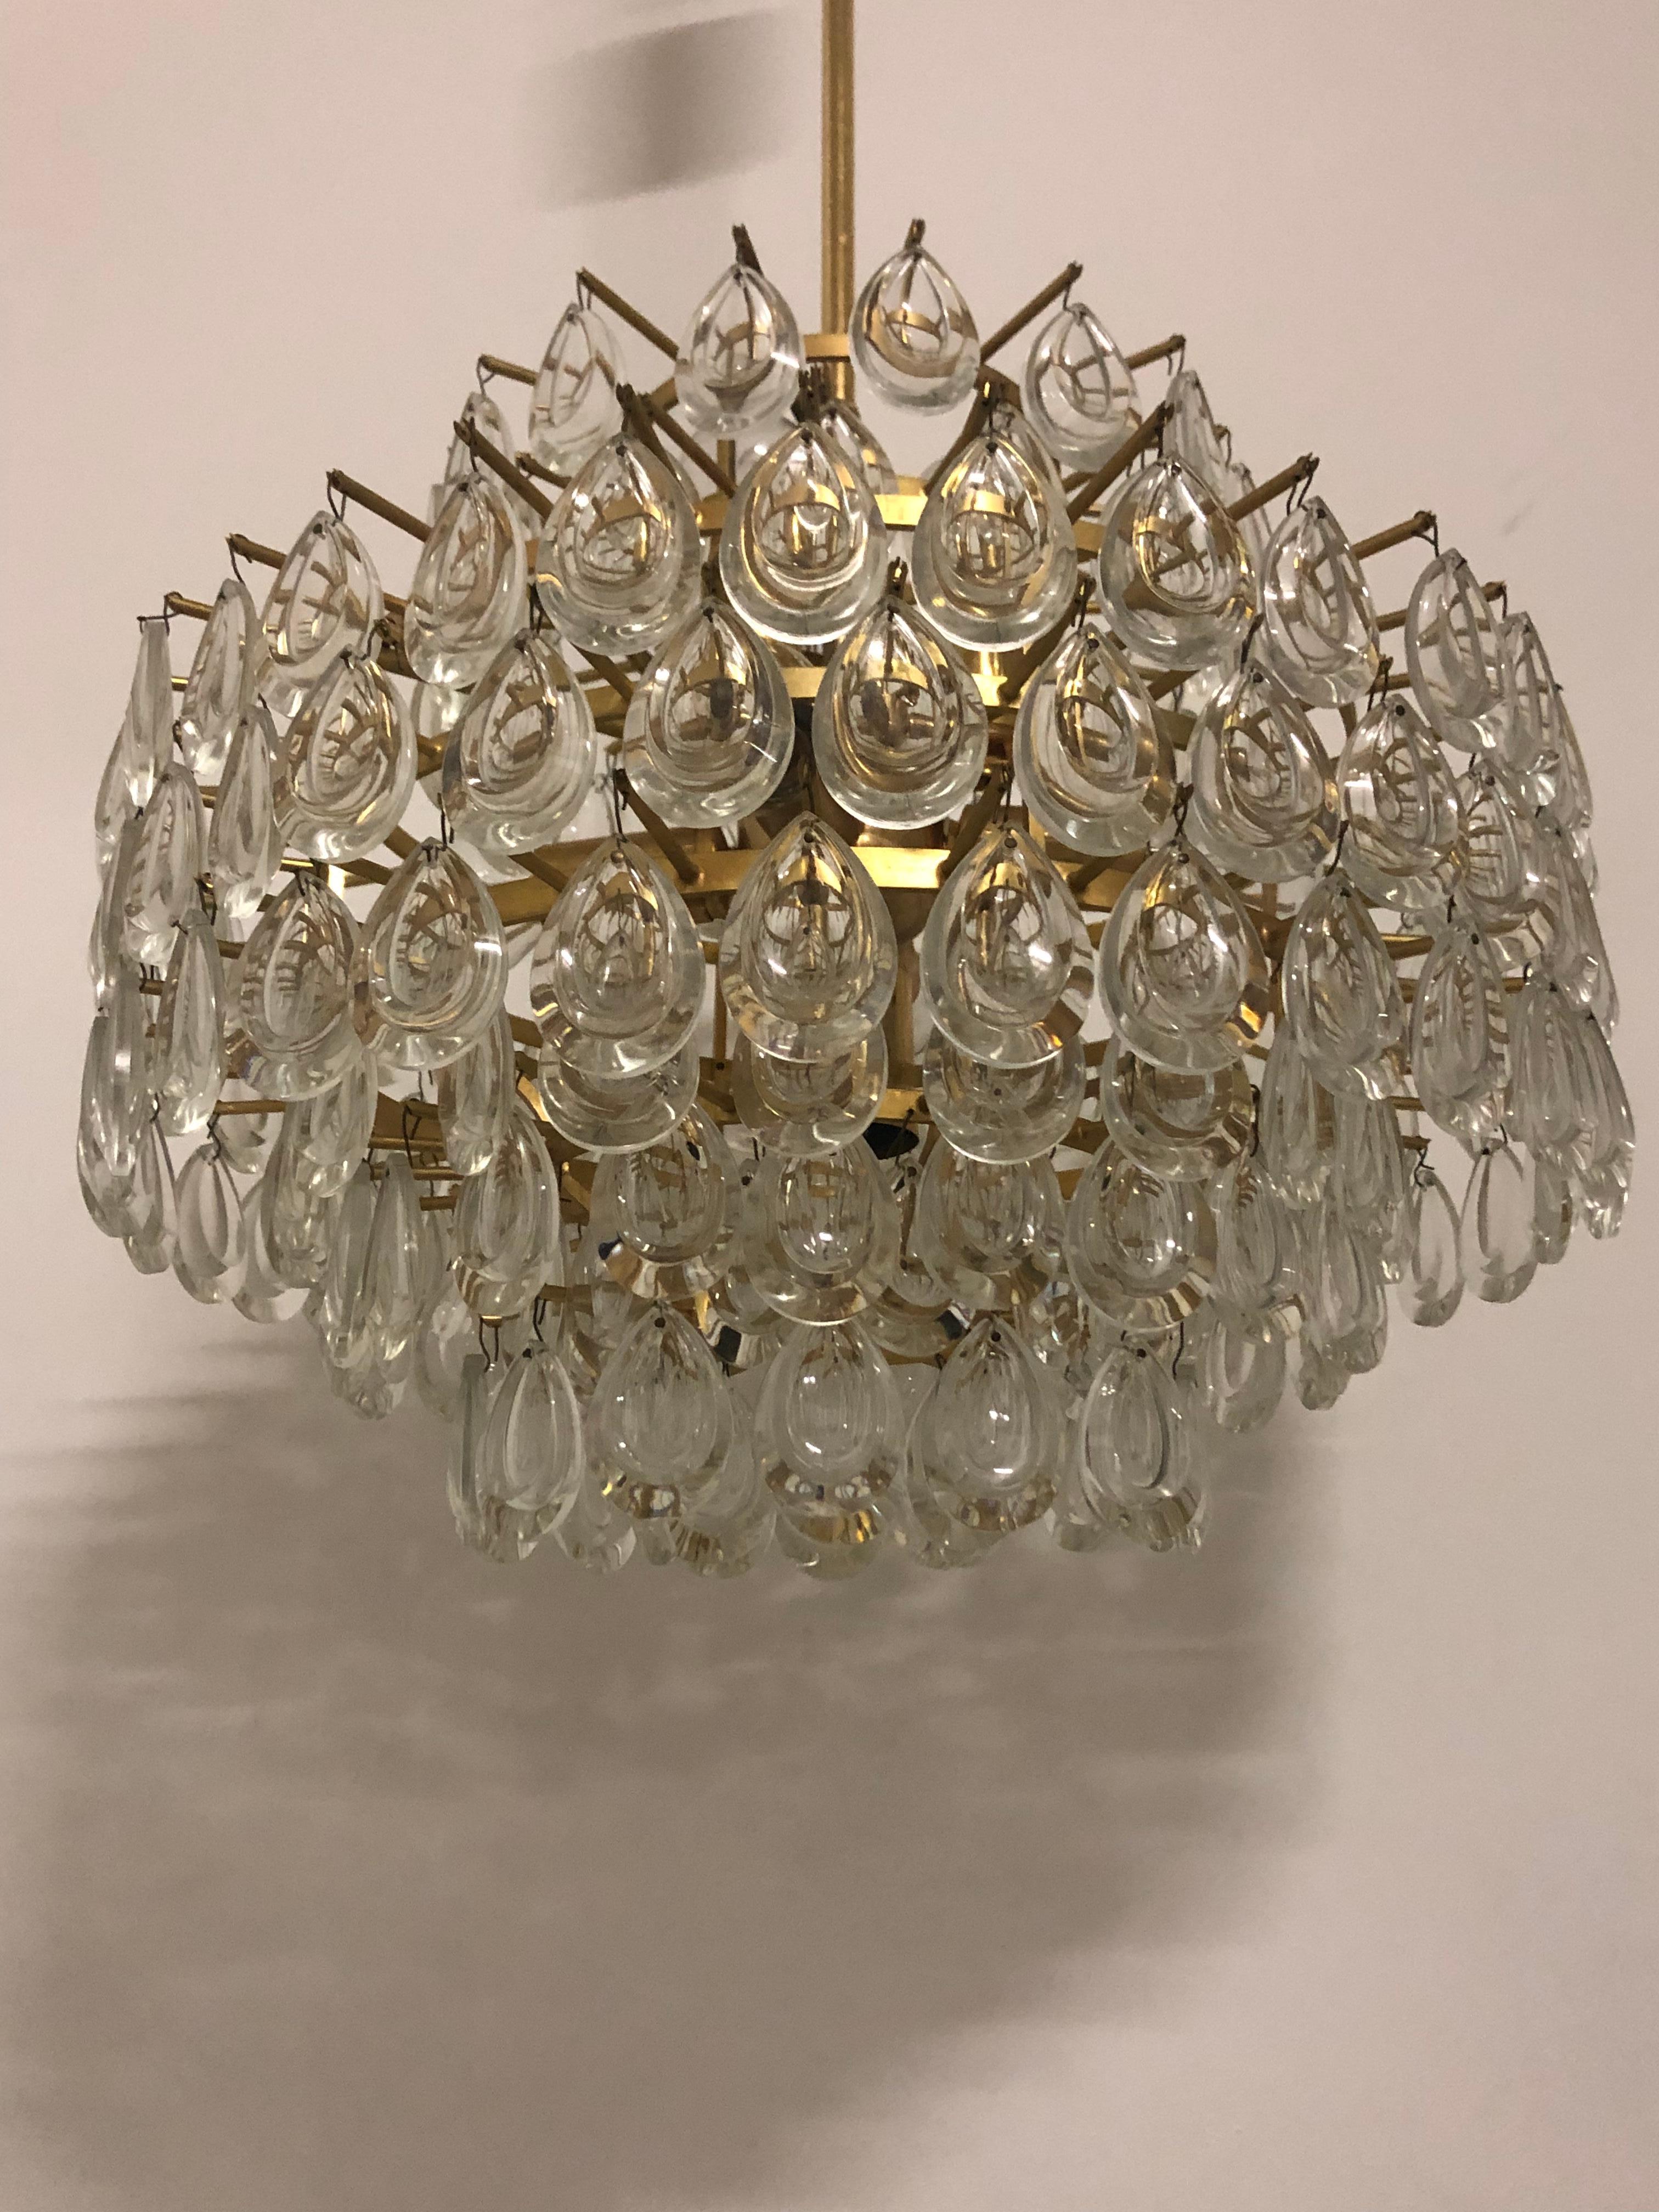 Mid-Century Modern Seven-Tiered Chandelier by Palwa, Git Brass and Lenses Glass, circa 1960s For Sale